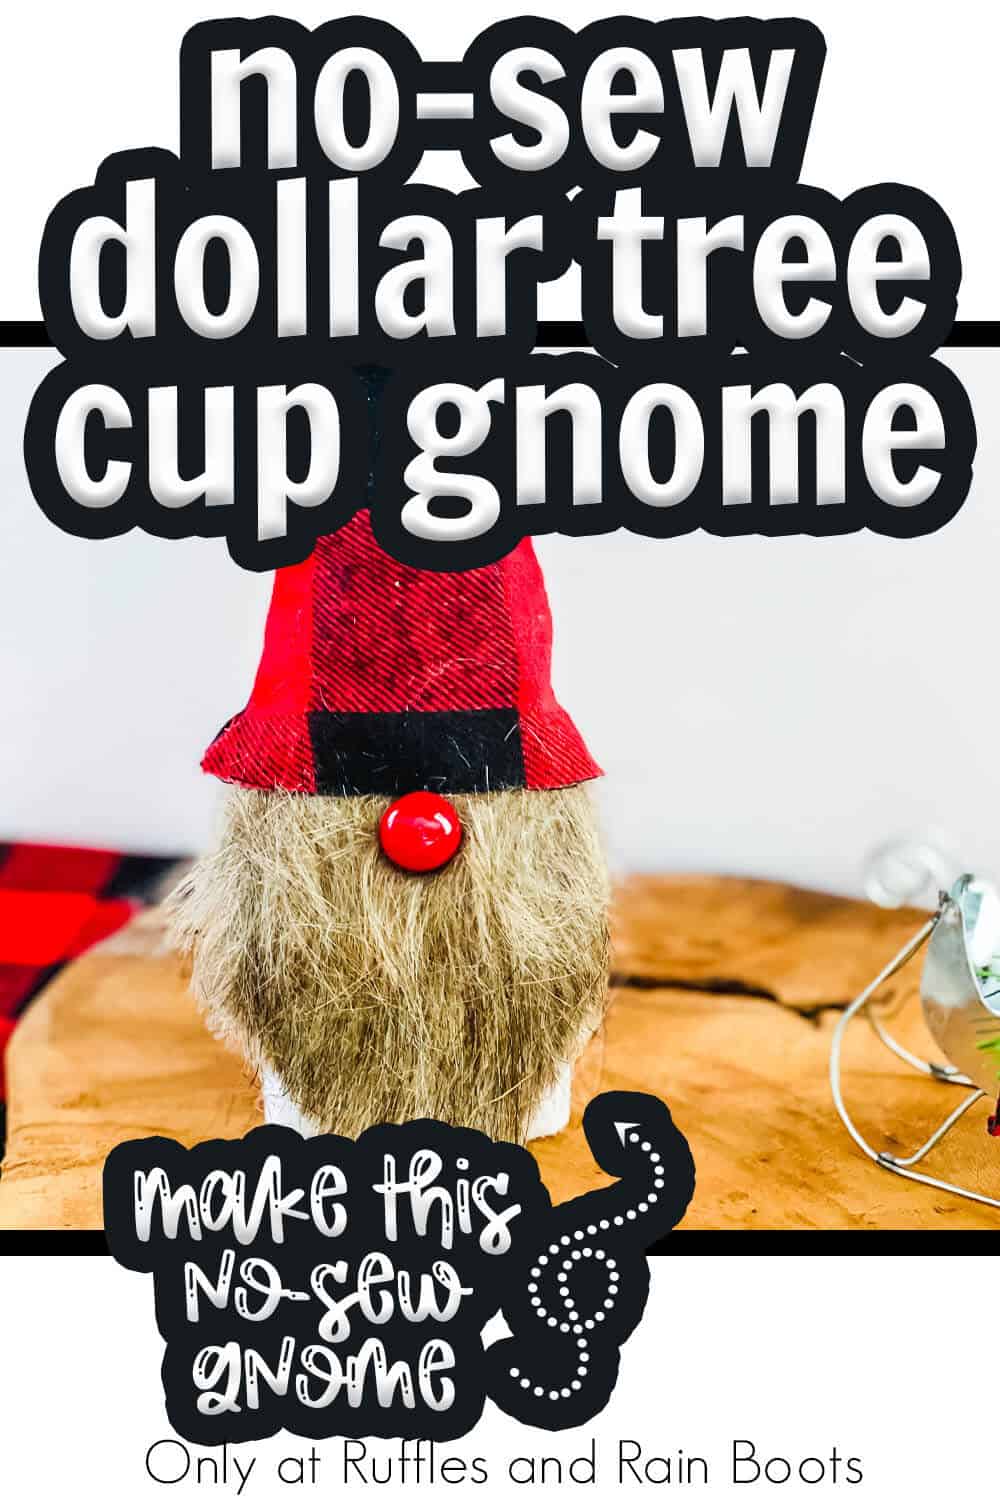 diy cup gnome craft with text which reads no-sew dollar tree cup gnome make this gnome in minutes